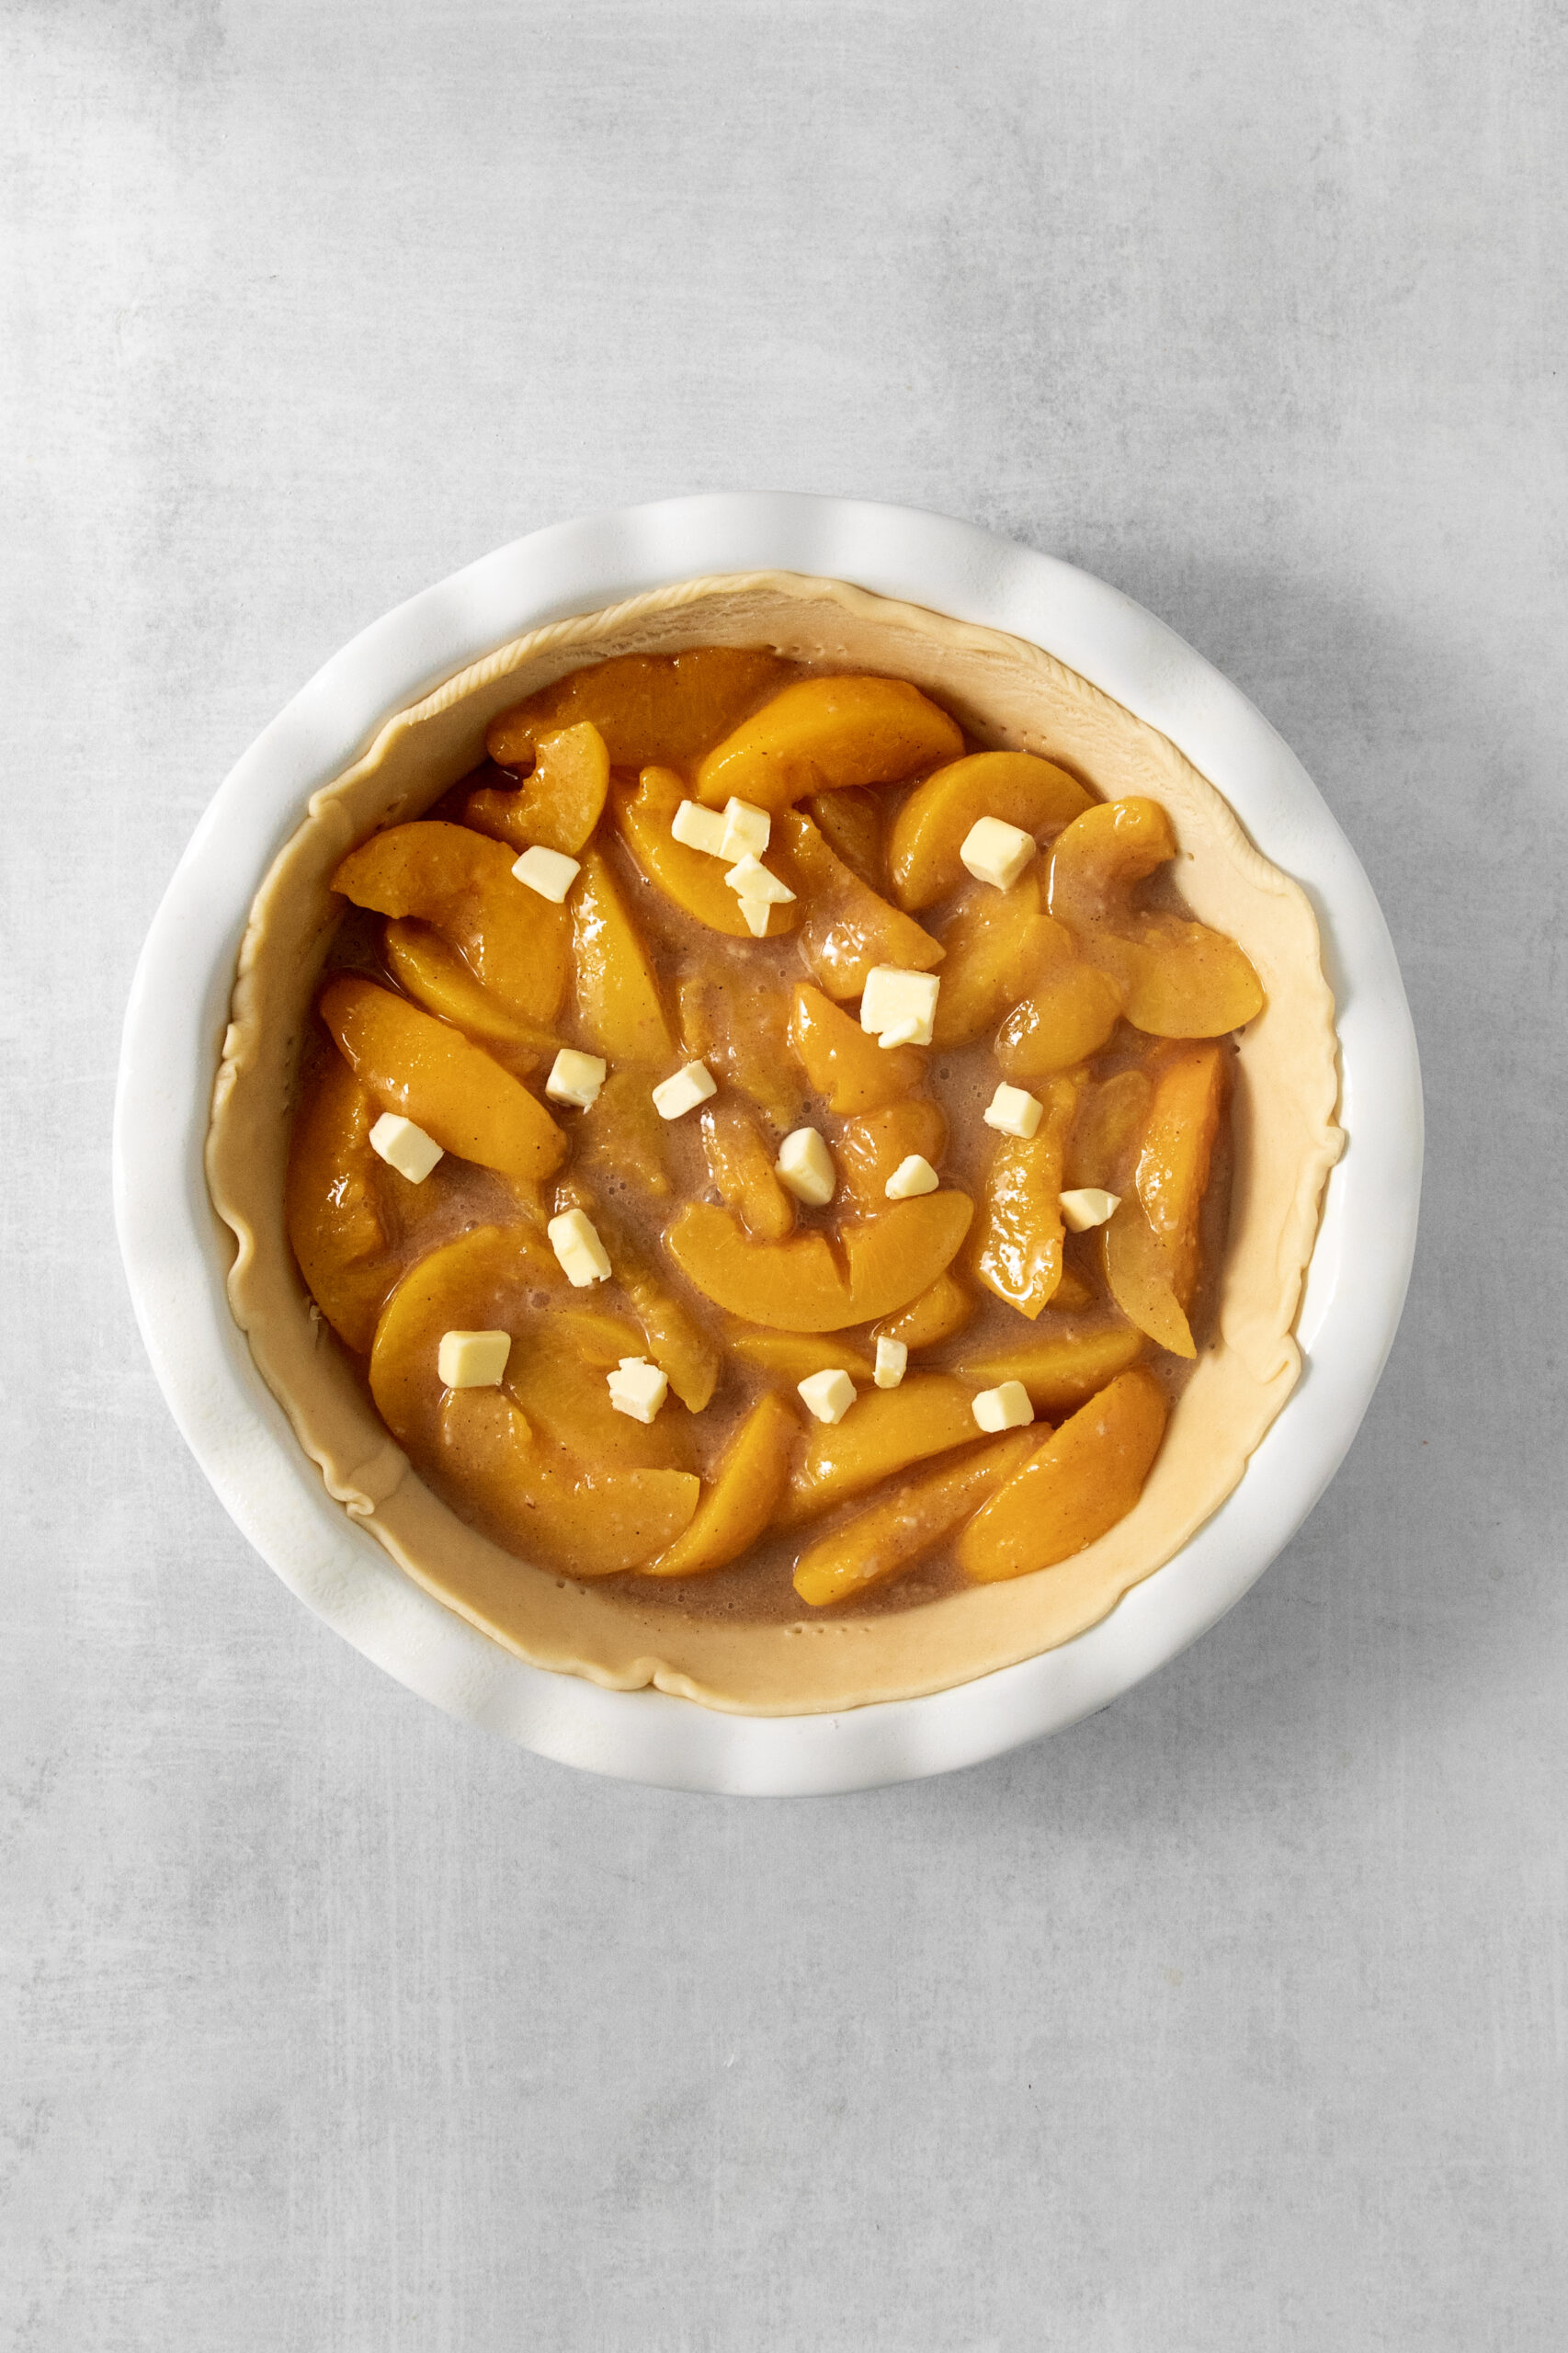 peach filling in a pie crust topped with butter pieces